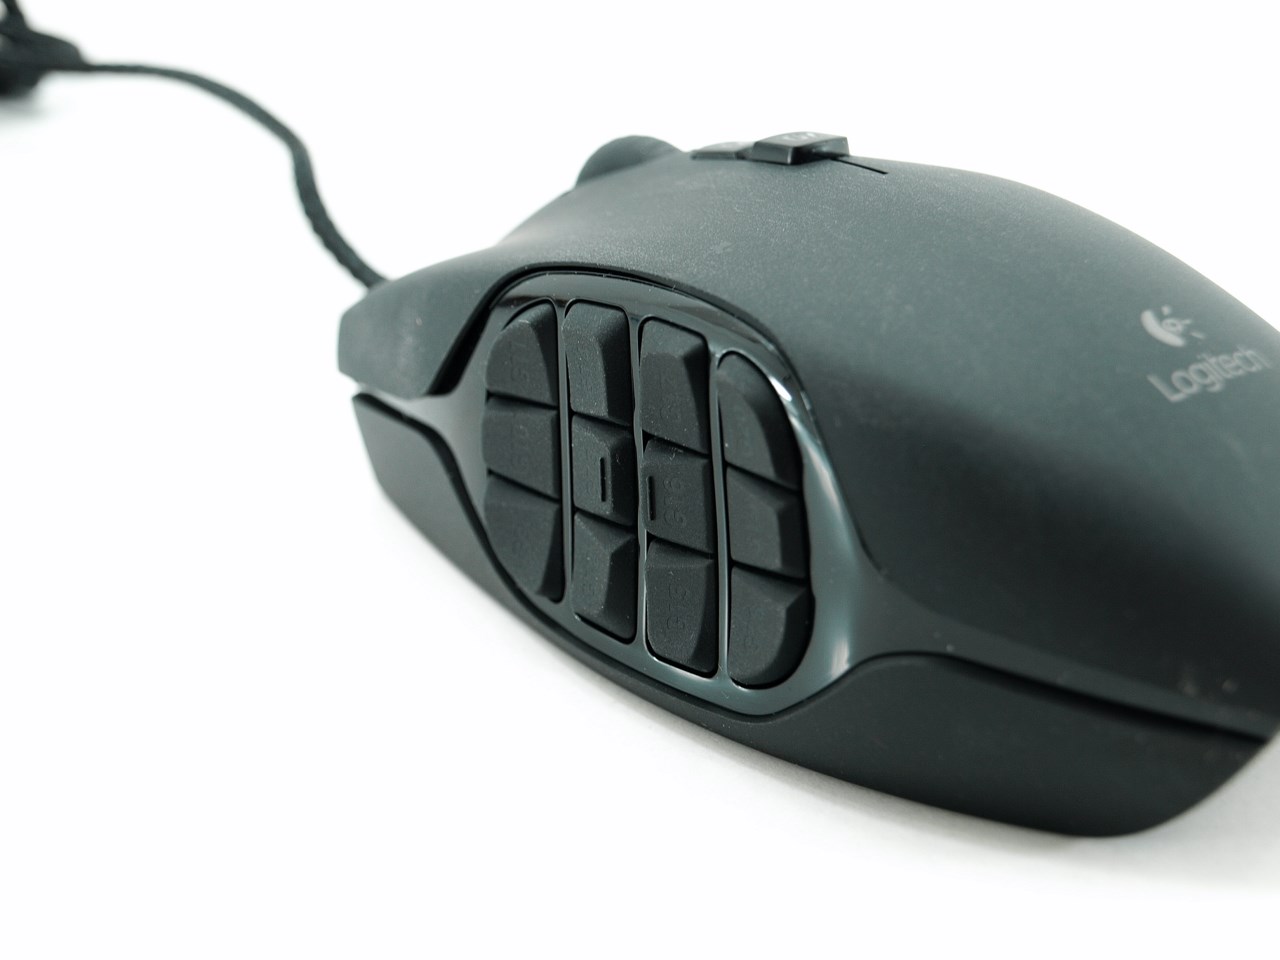 Review: Logitech G600 is an excellent MMO gaming mouse